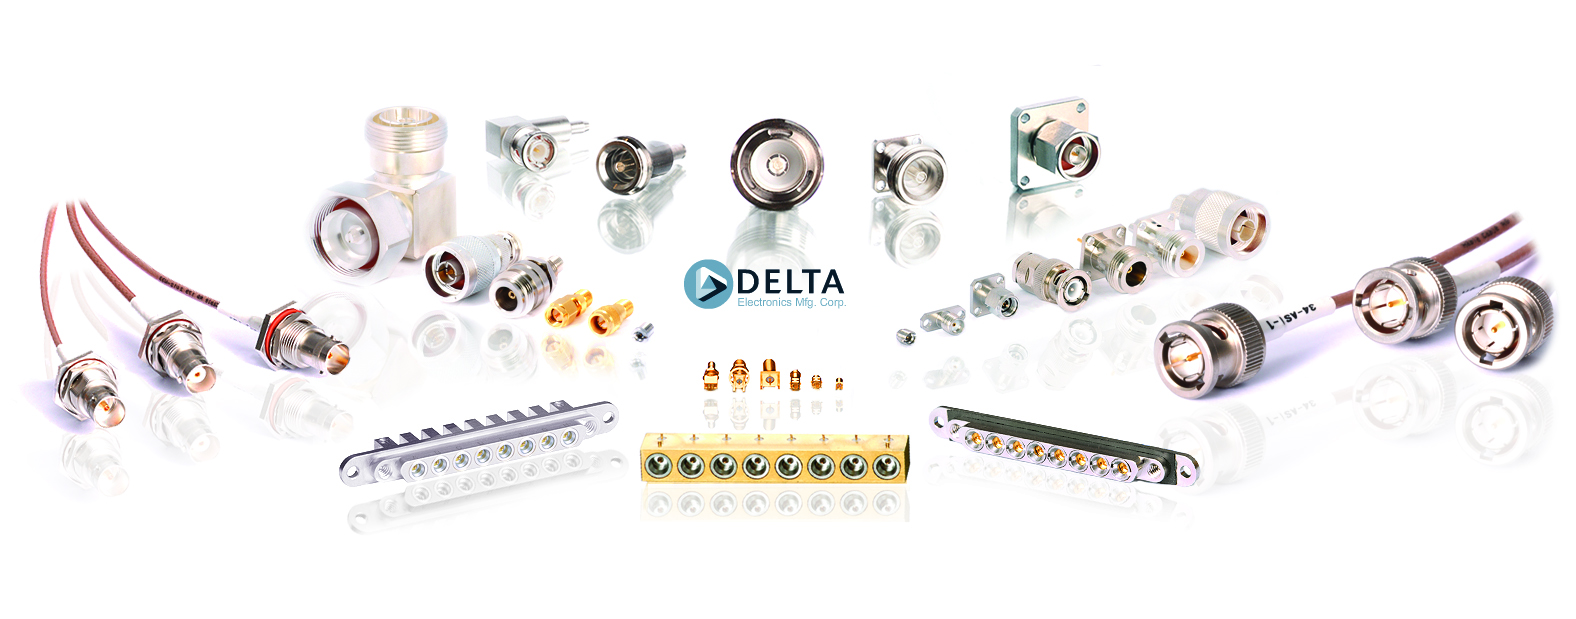 Delta Product Line